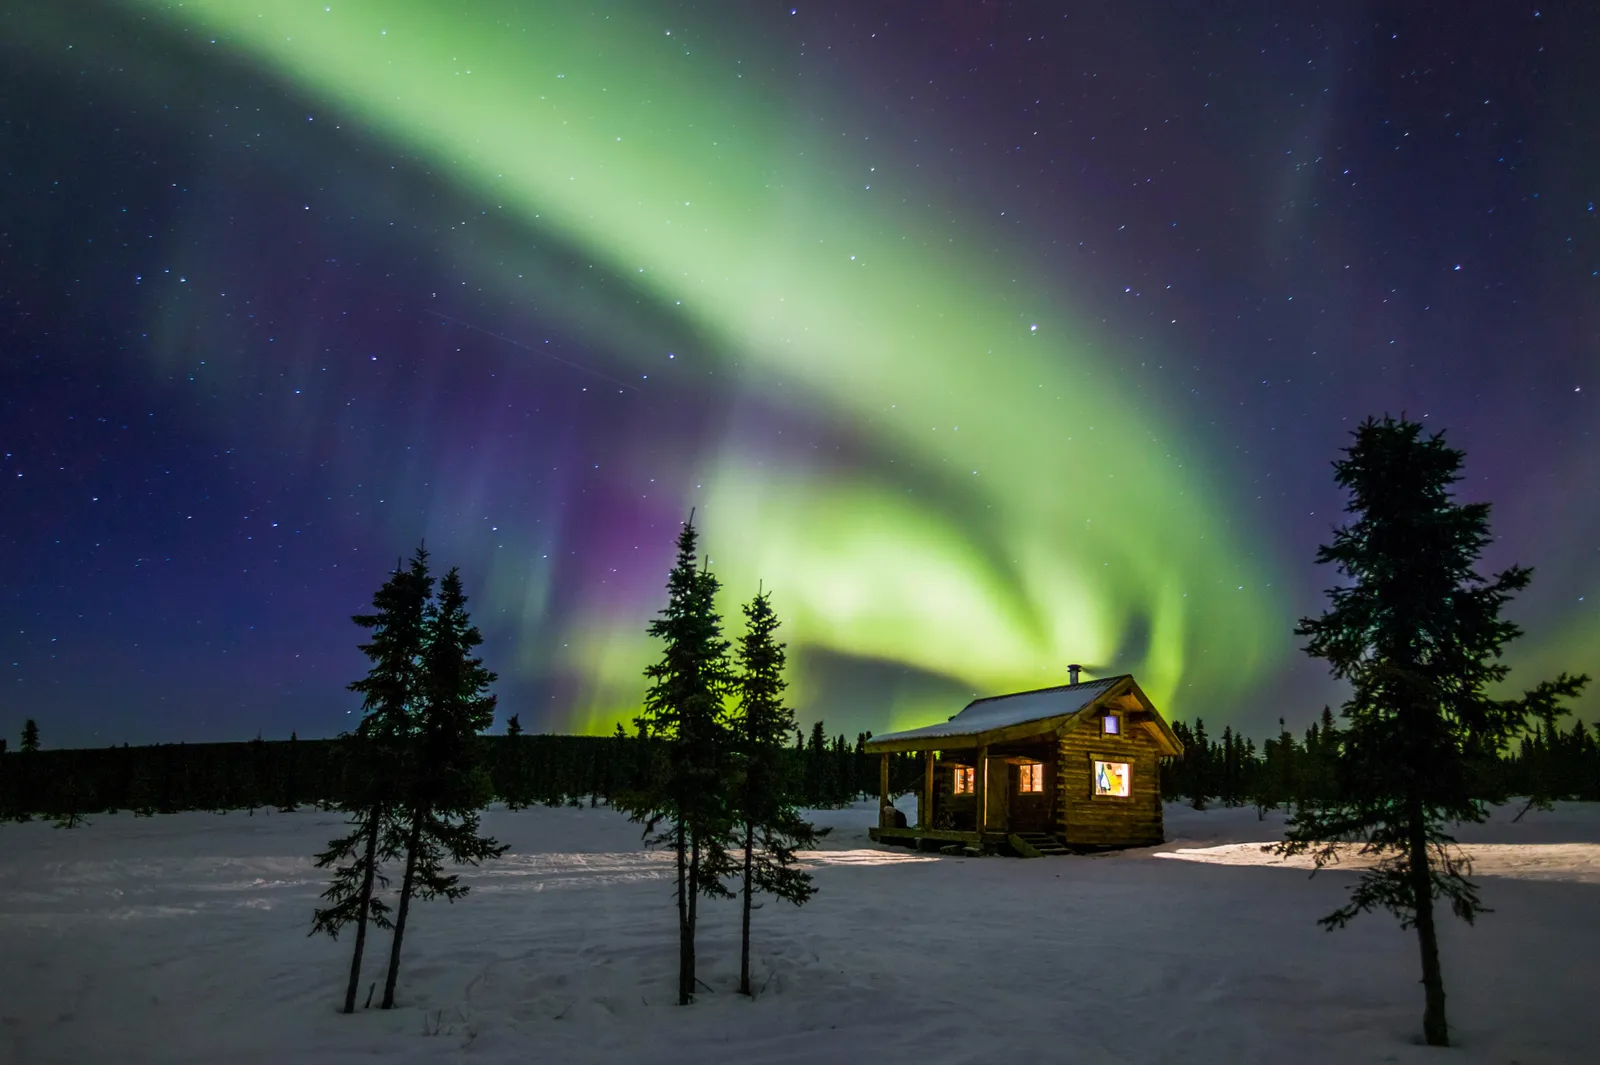 Best Place to See Polar Bears and Northern Lights